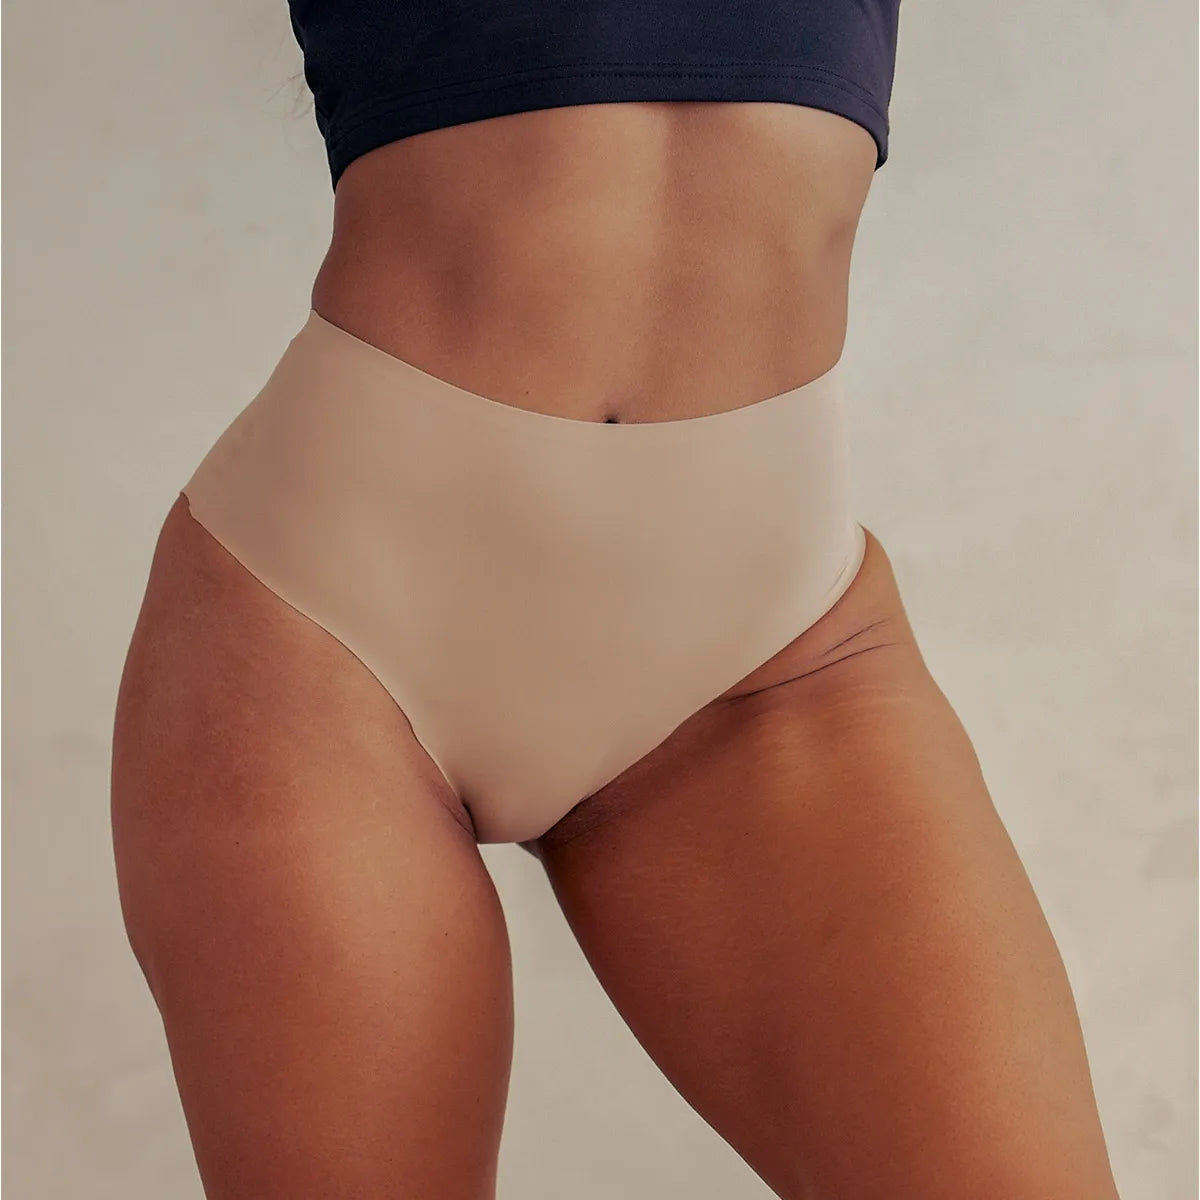 Flattering and Comfortable High-Waist Control Panties for Women